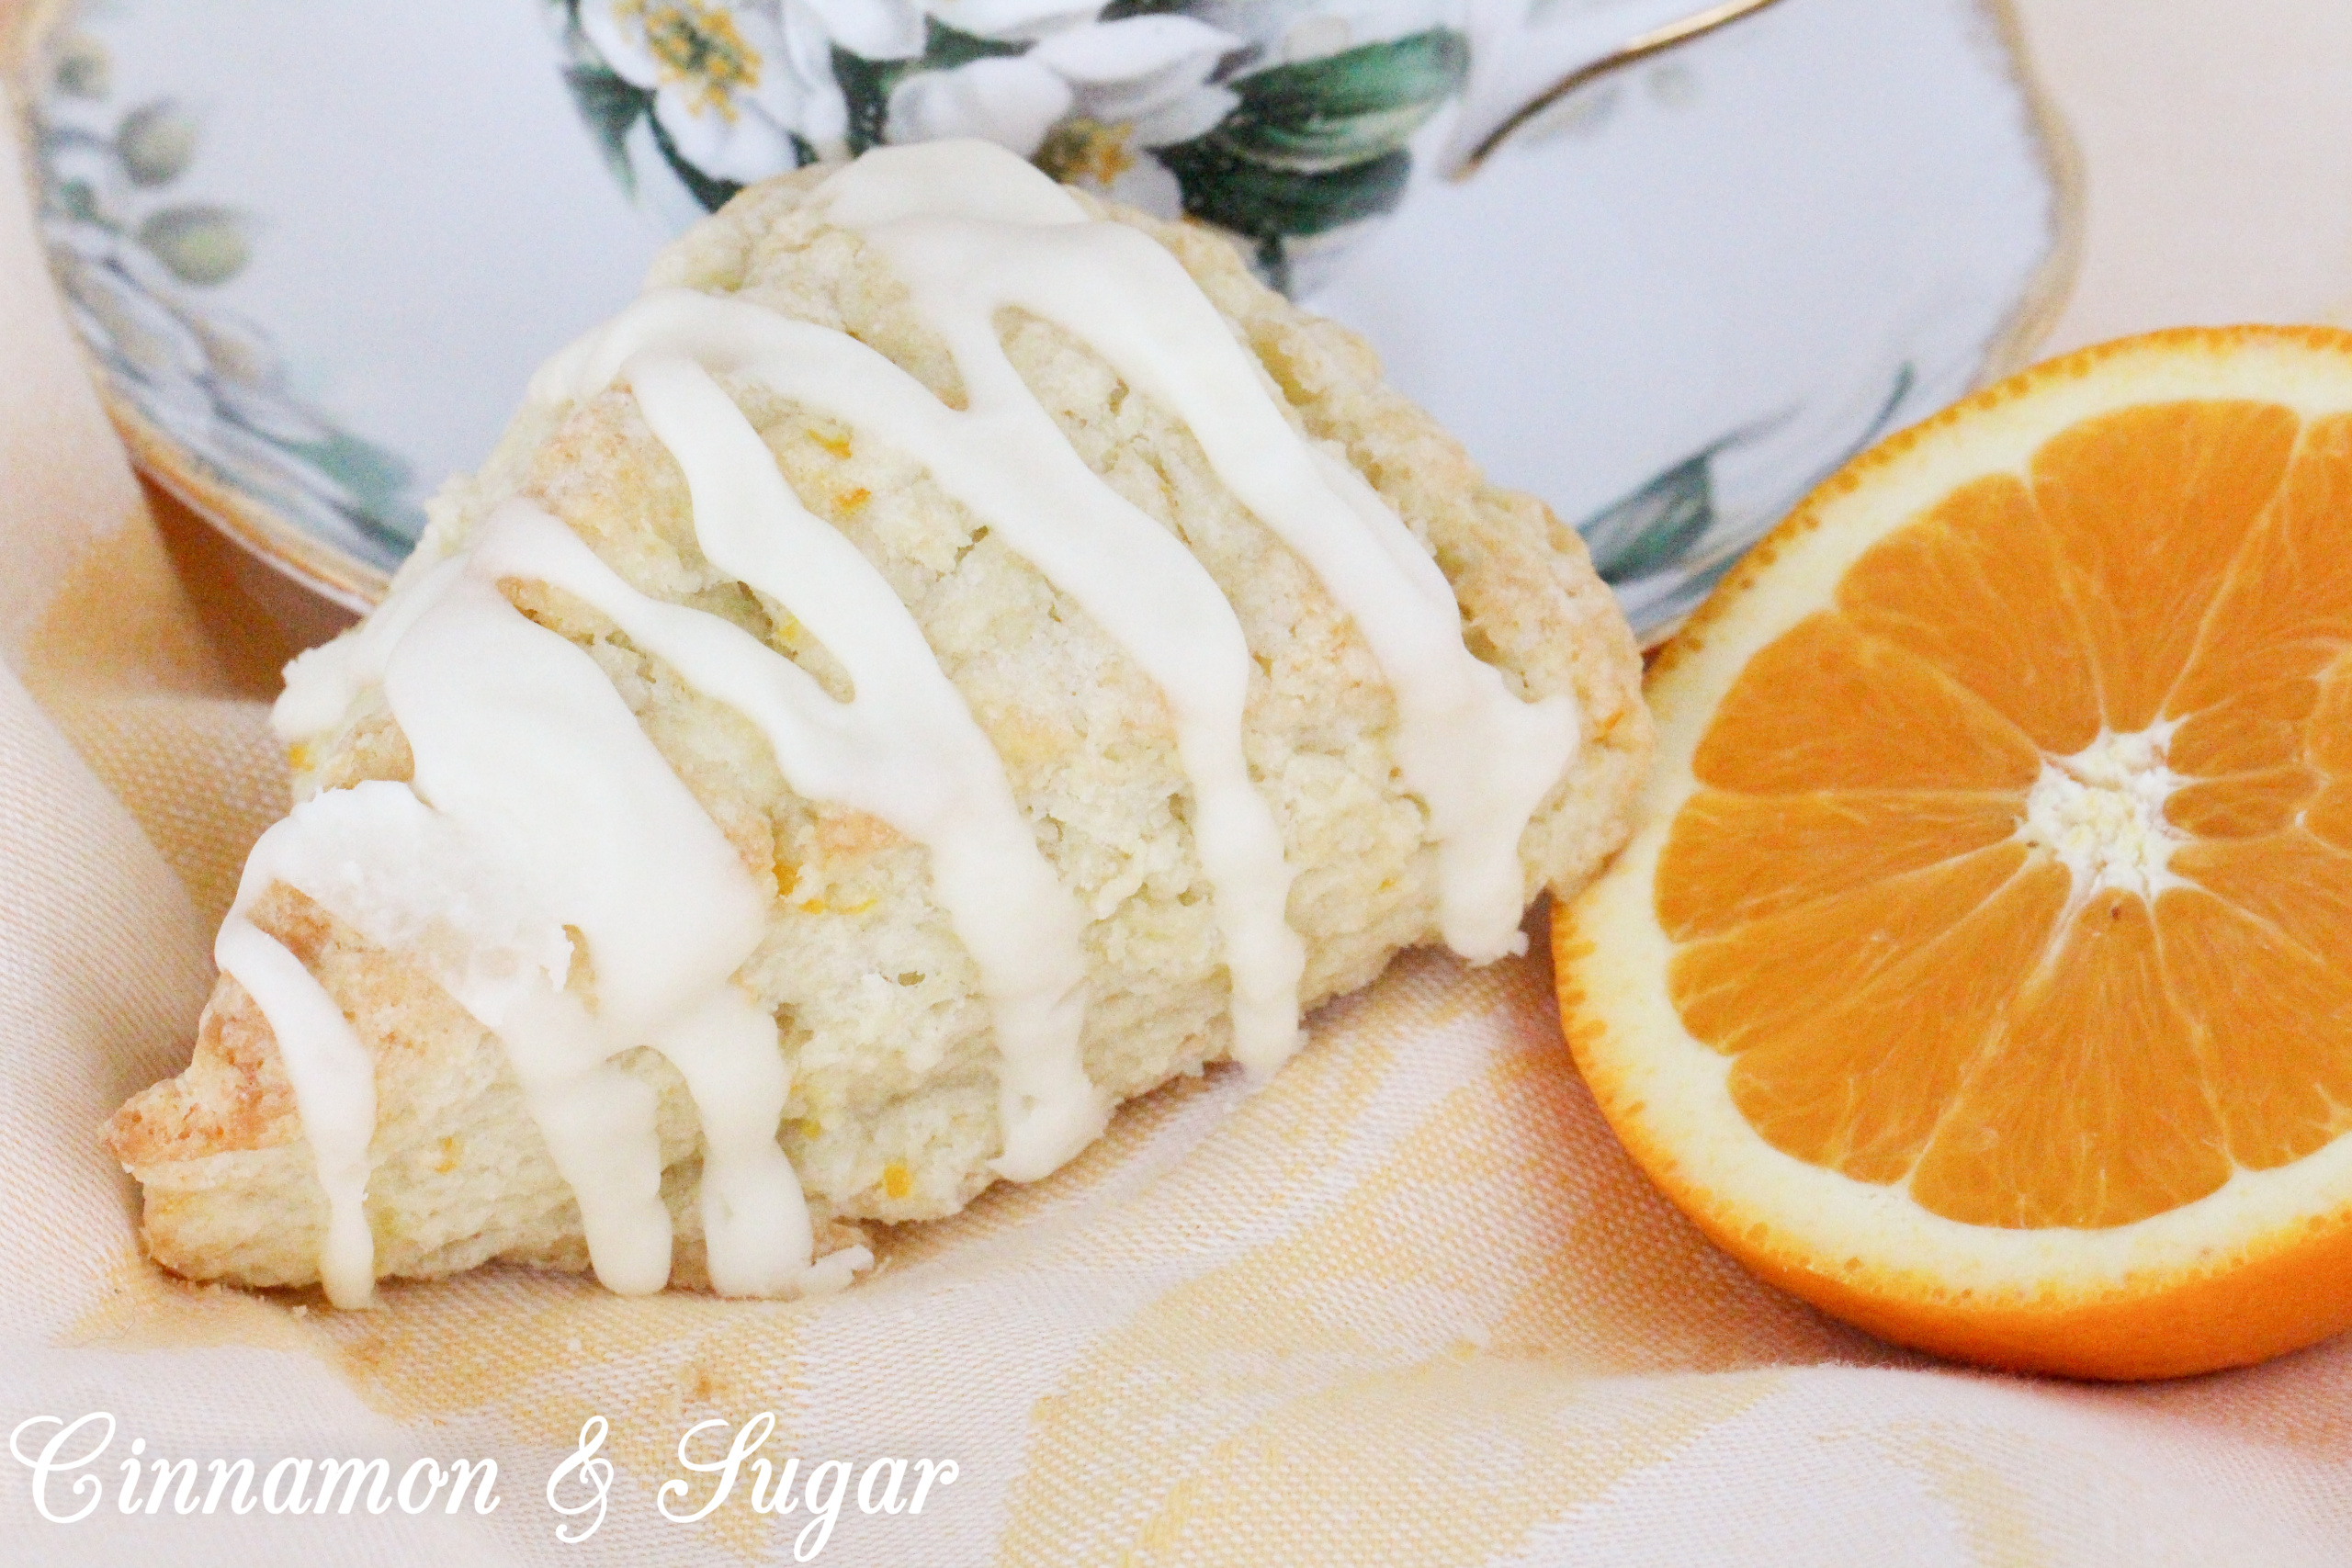 These flaky Orange Scones are easy to mix up and the sweet, orange glaze boosts the wow factor. Scrumptious on their own, a smear of orange marmalade would make them even more delectable! Recipe shared with permission granted by Maddie Day, author of NACHO AVERAGE MURDER. 